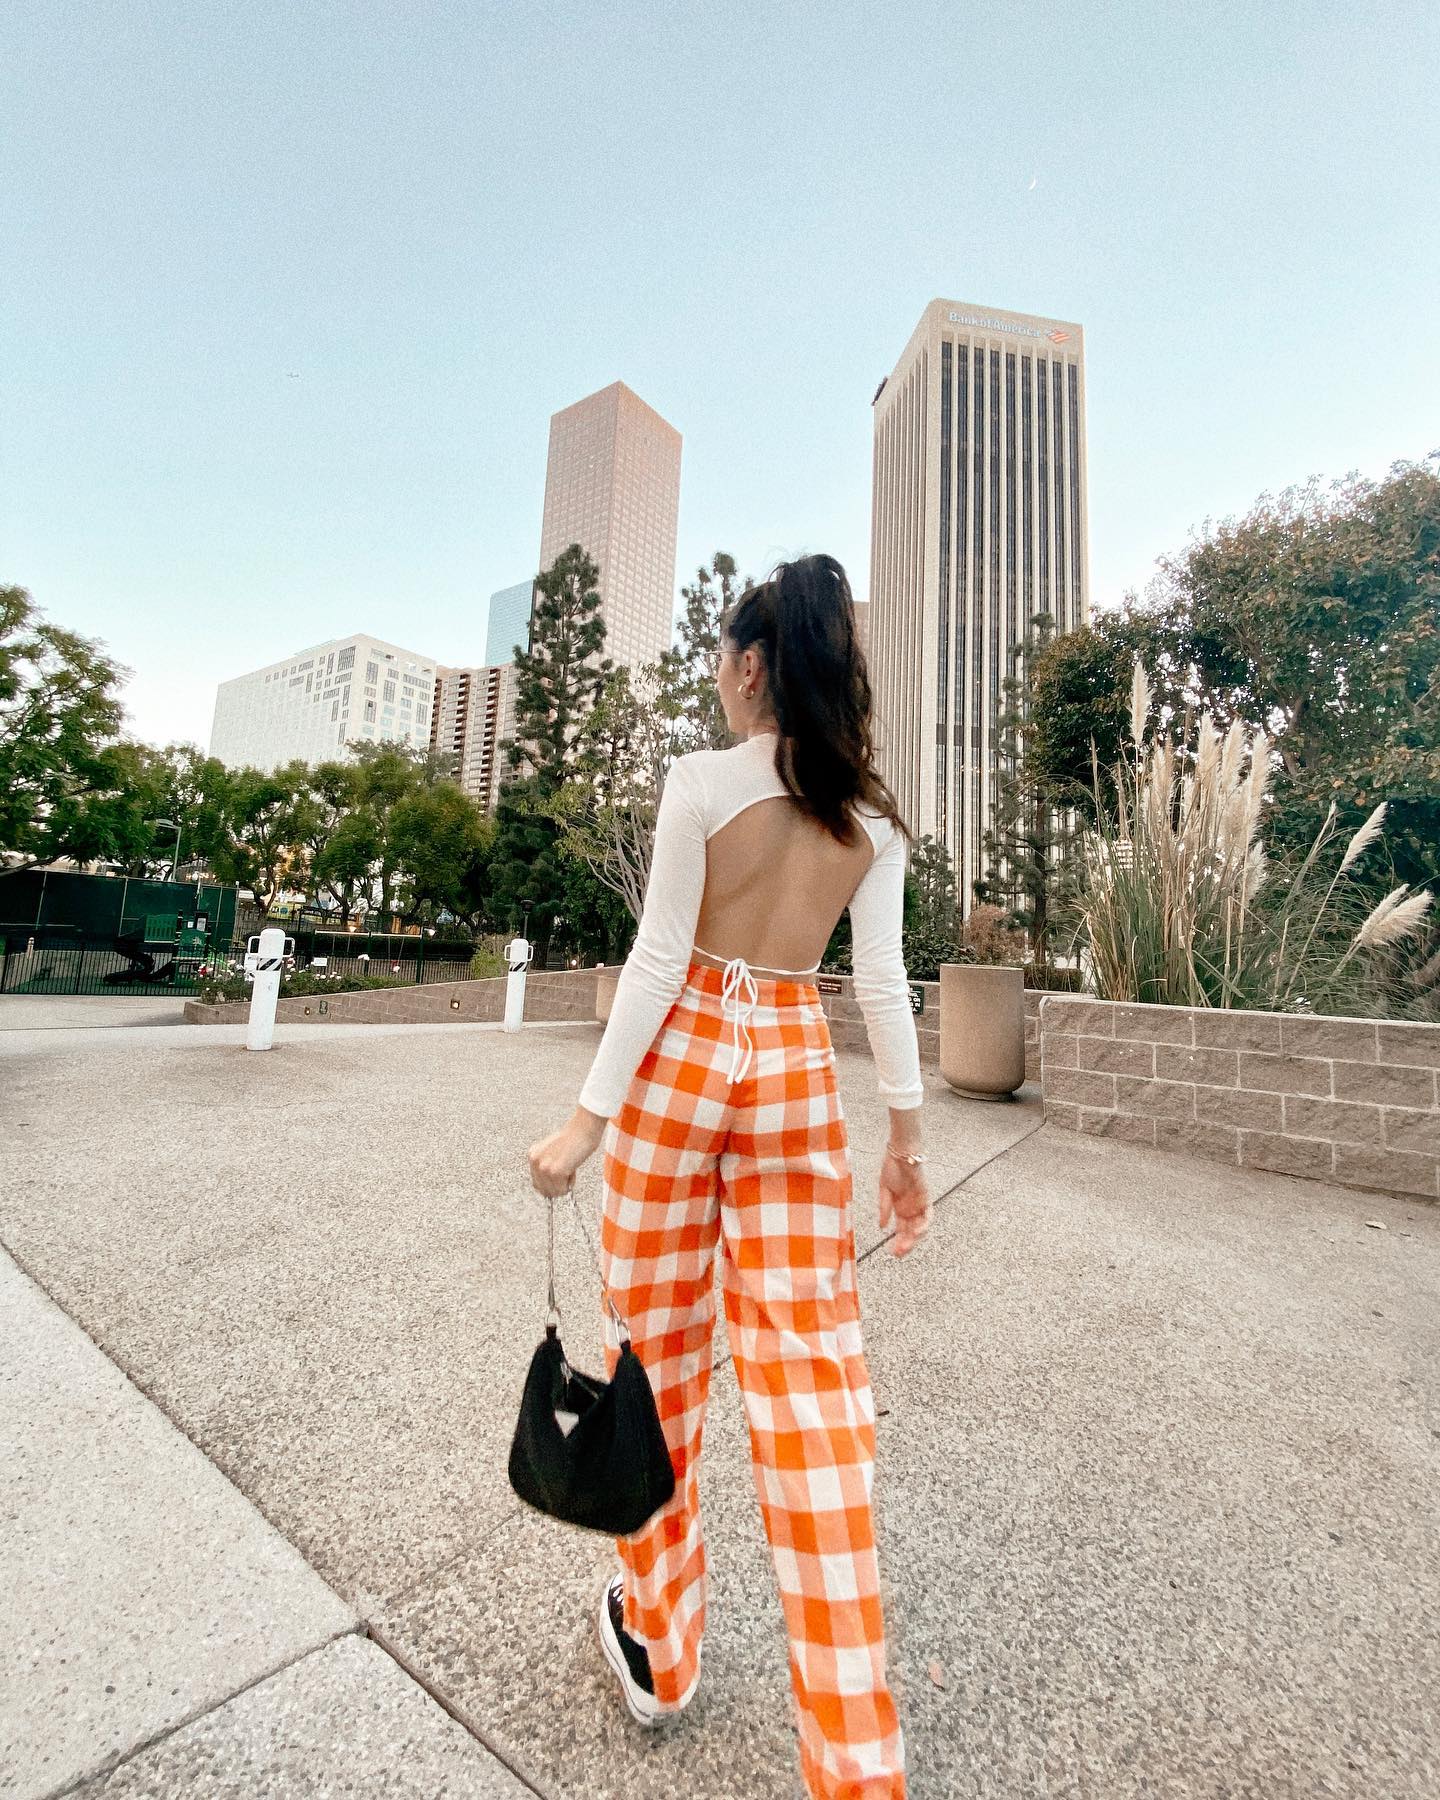 Wearing plaid pants with a fitted open-back top